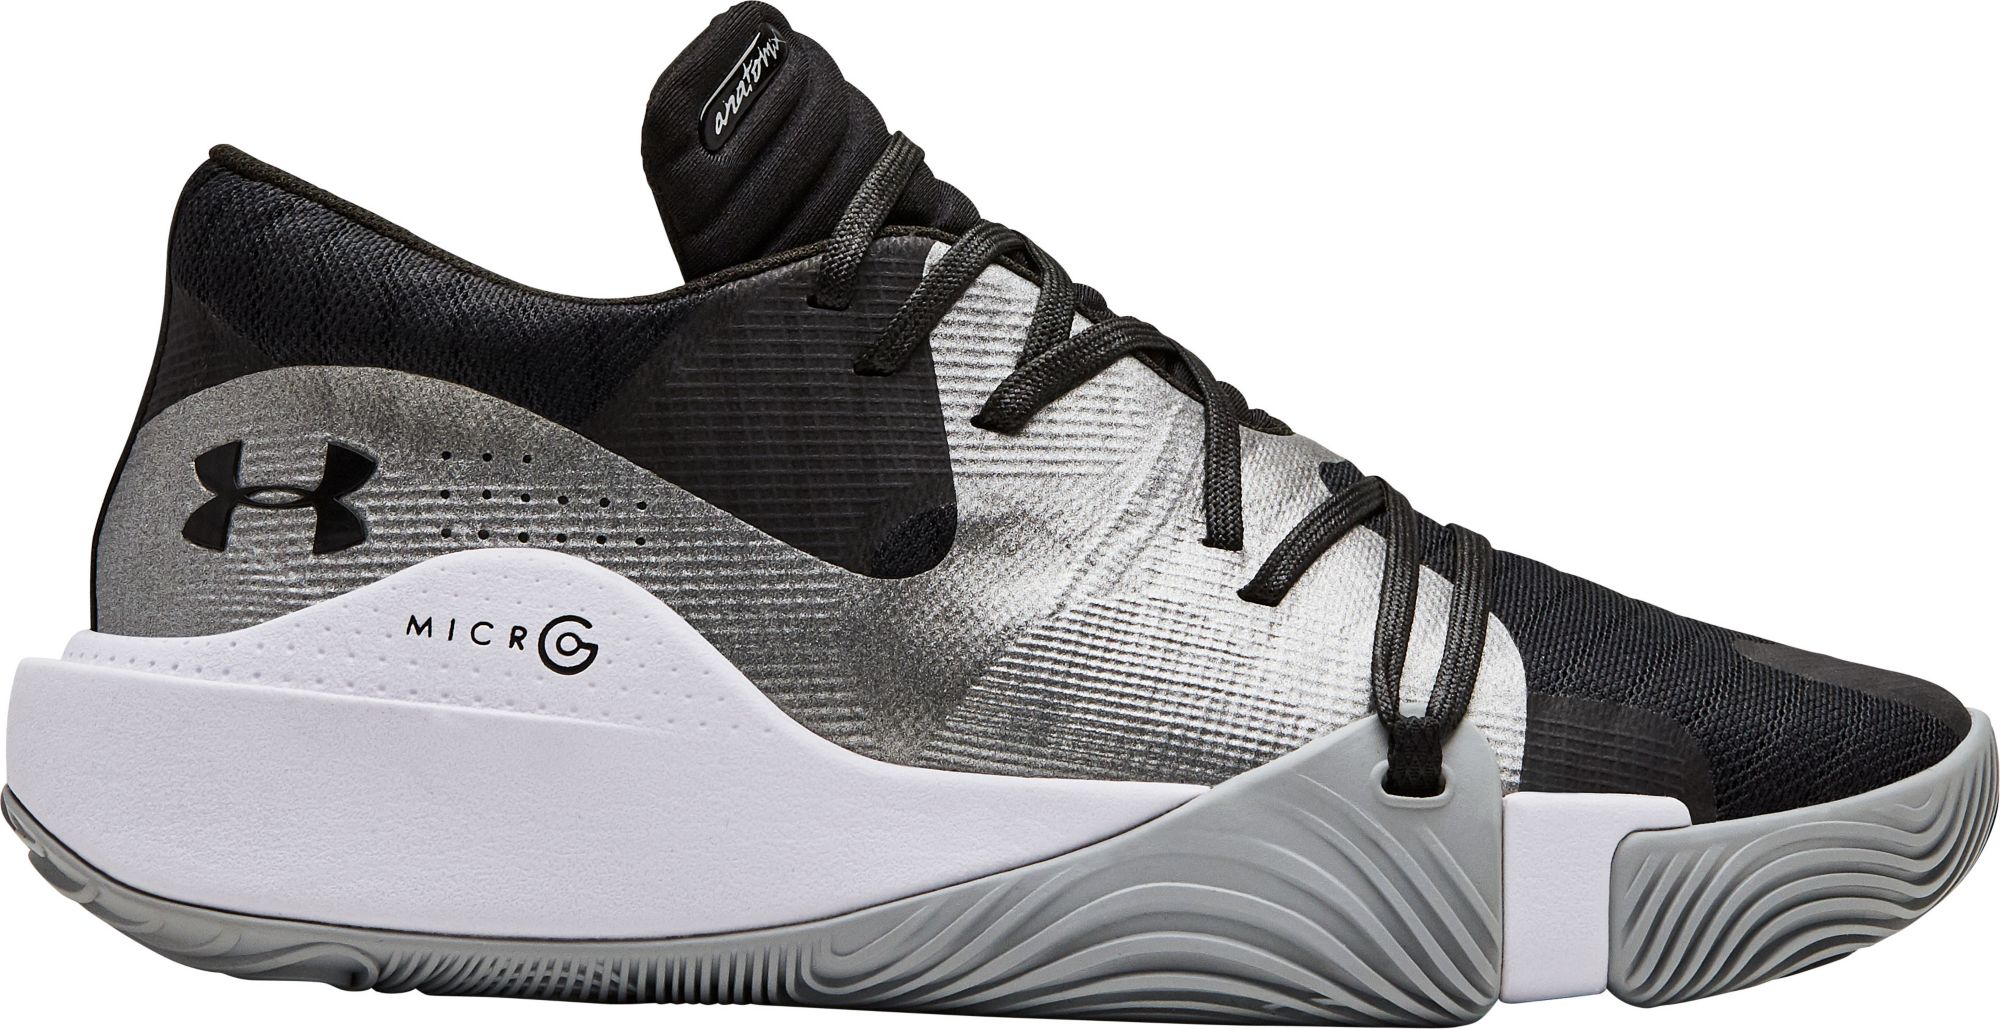 under armour spawn low mens basketball shoes